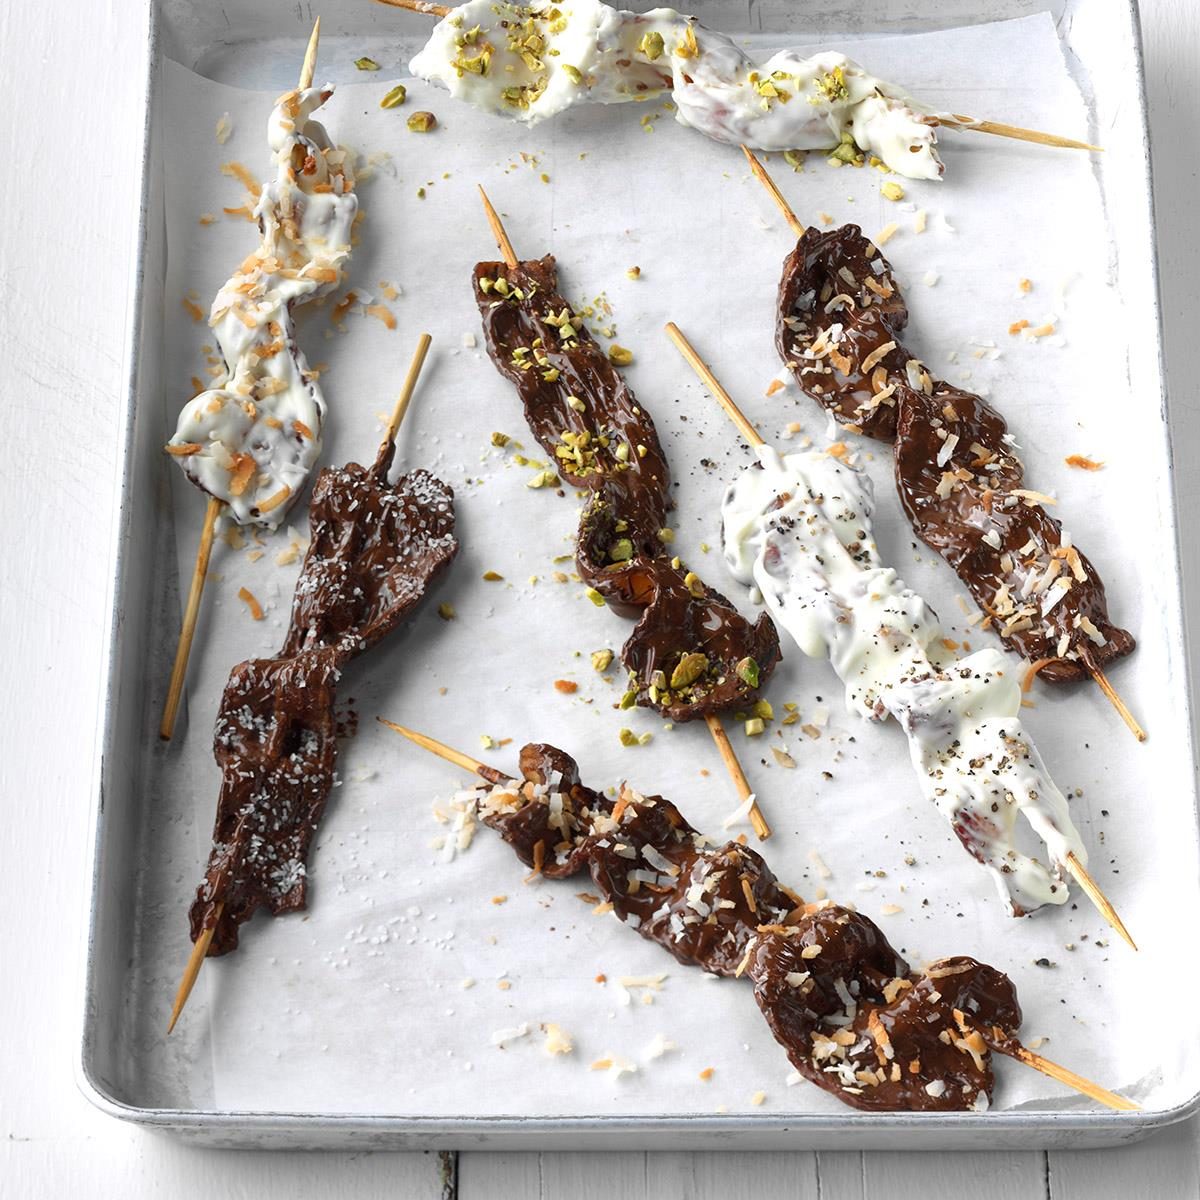 Chocolate-Covered-Bacon_EXPS_WRSM17_48039_C03_24_5b